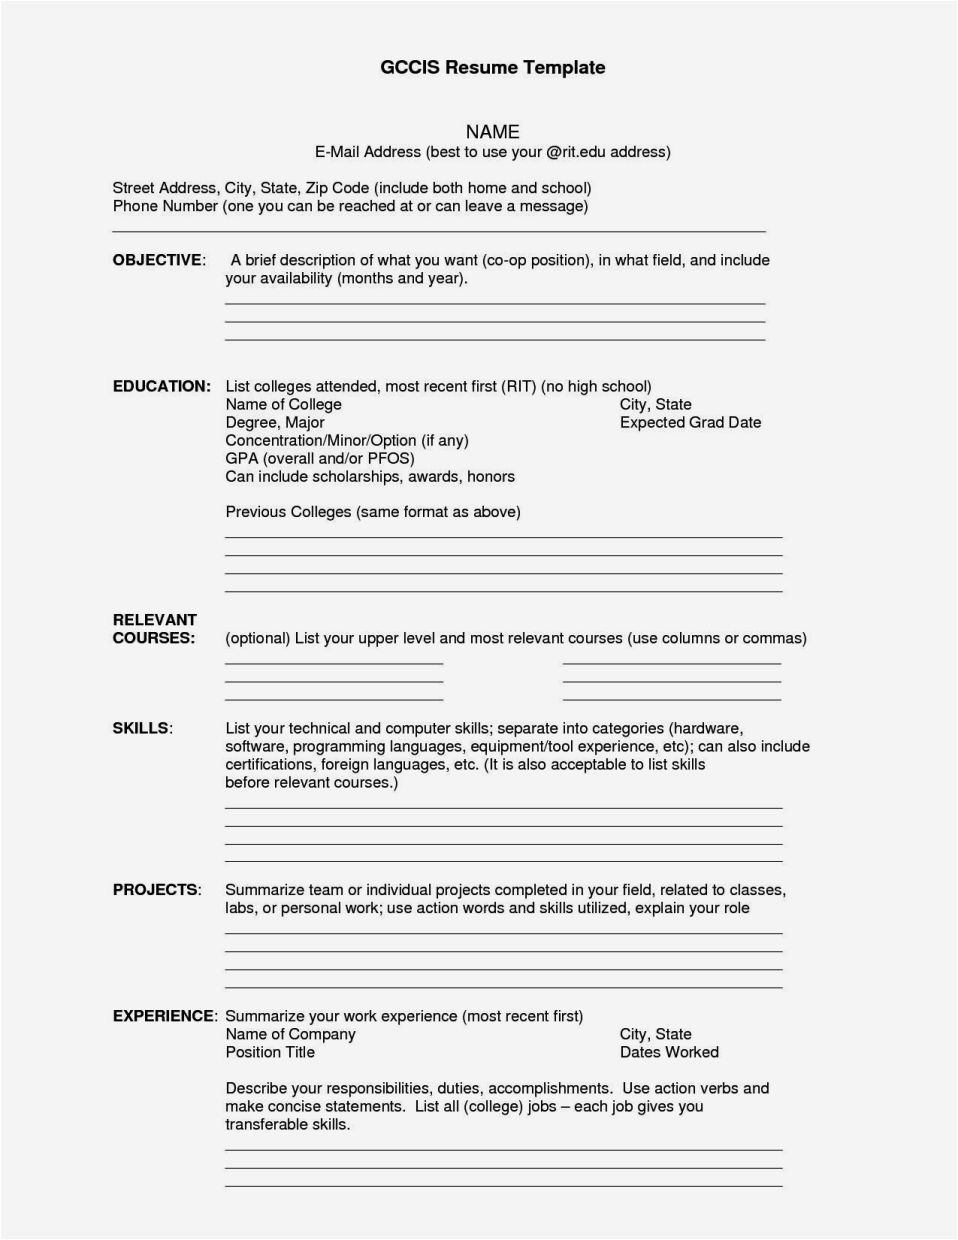 Easy Fill In the Blank General Resume Easy Fill In Resume Resume Template Cover Letter